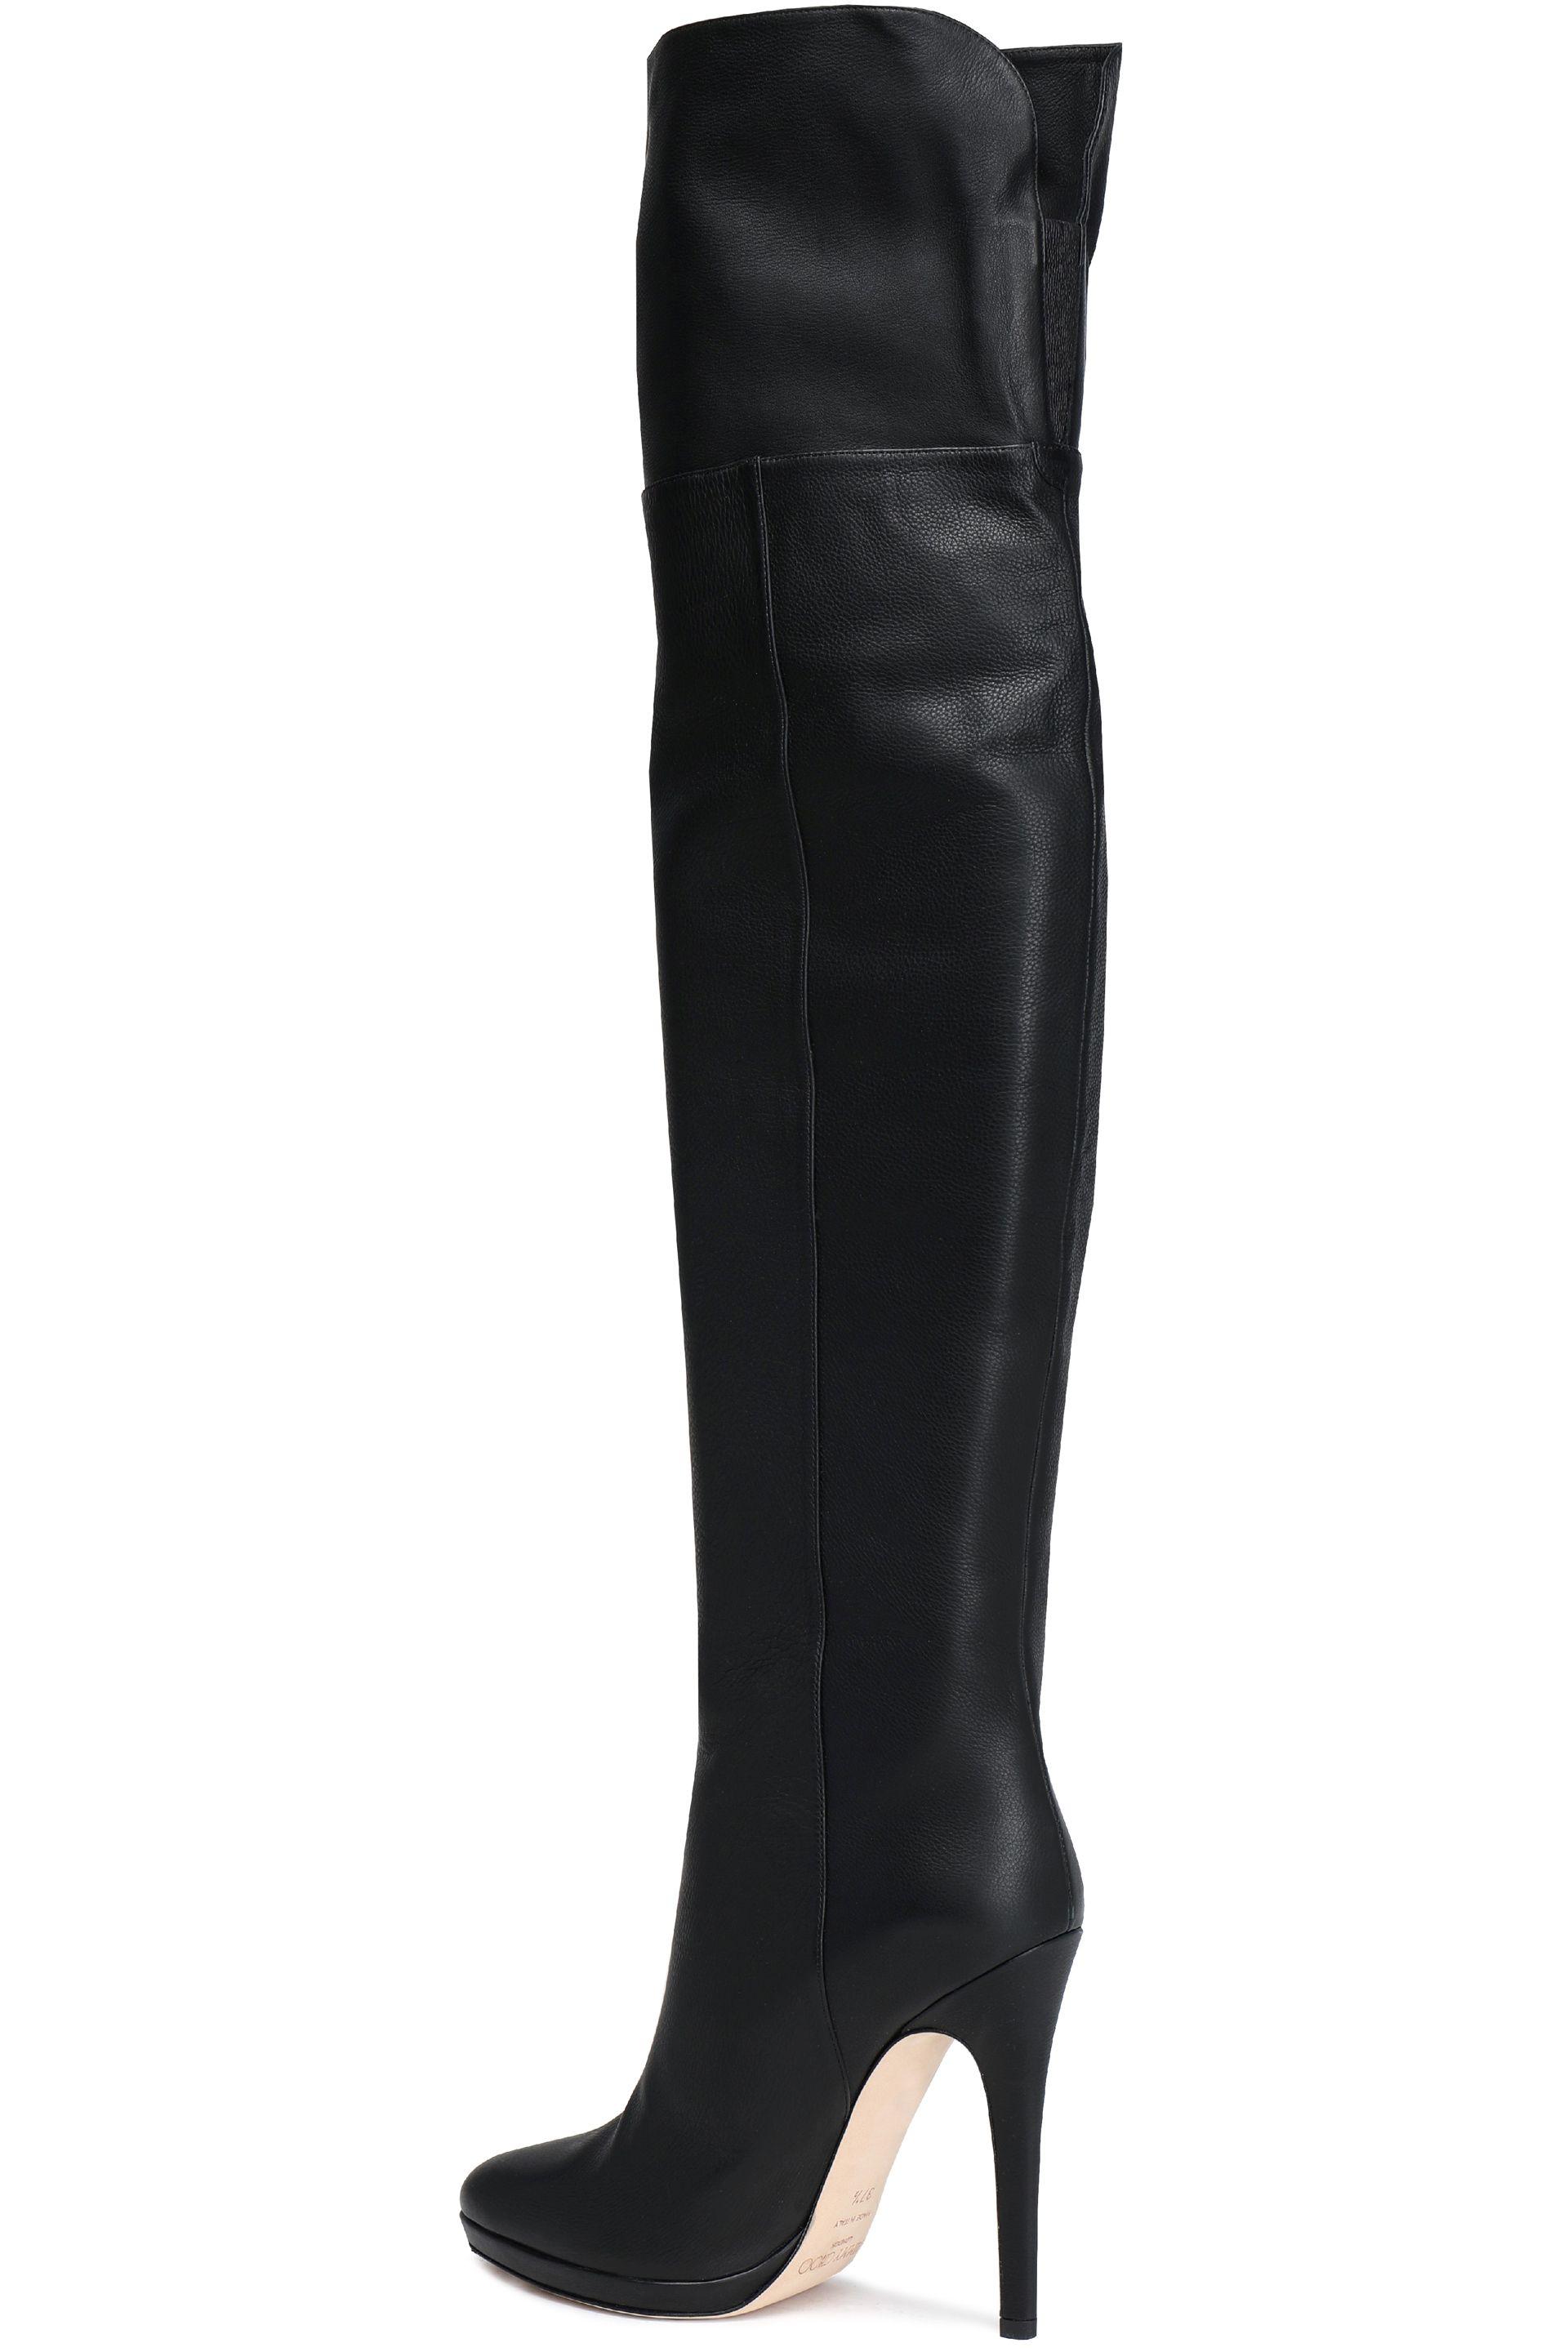 Jimmy Choo Giselle 120 Textured-leather Platform Over-the-knee Boots ...